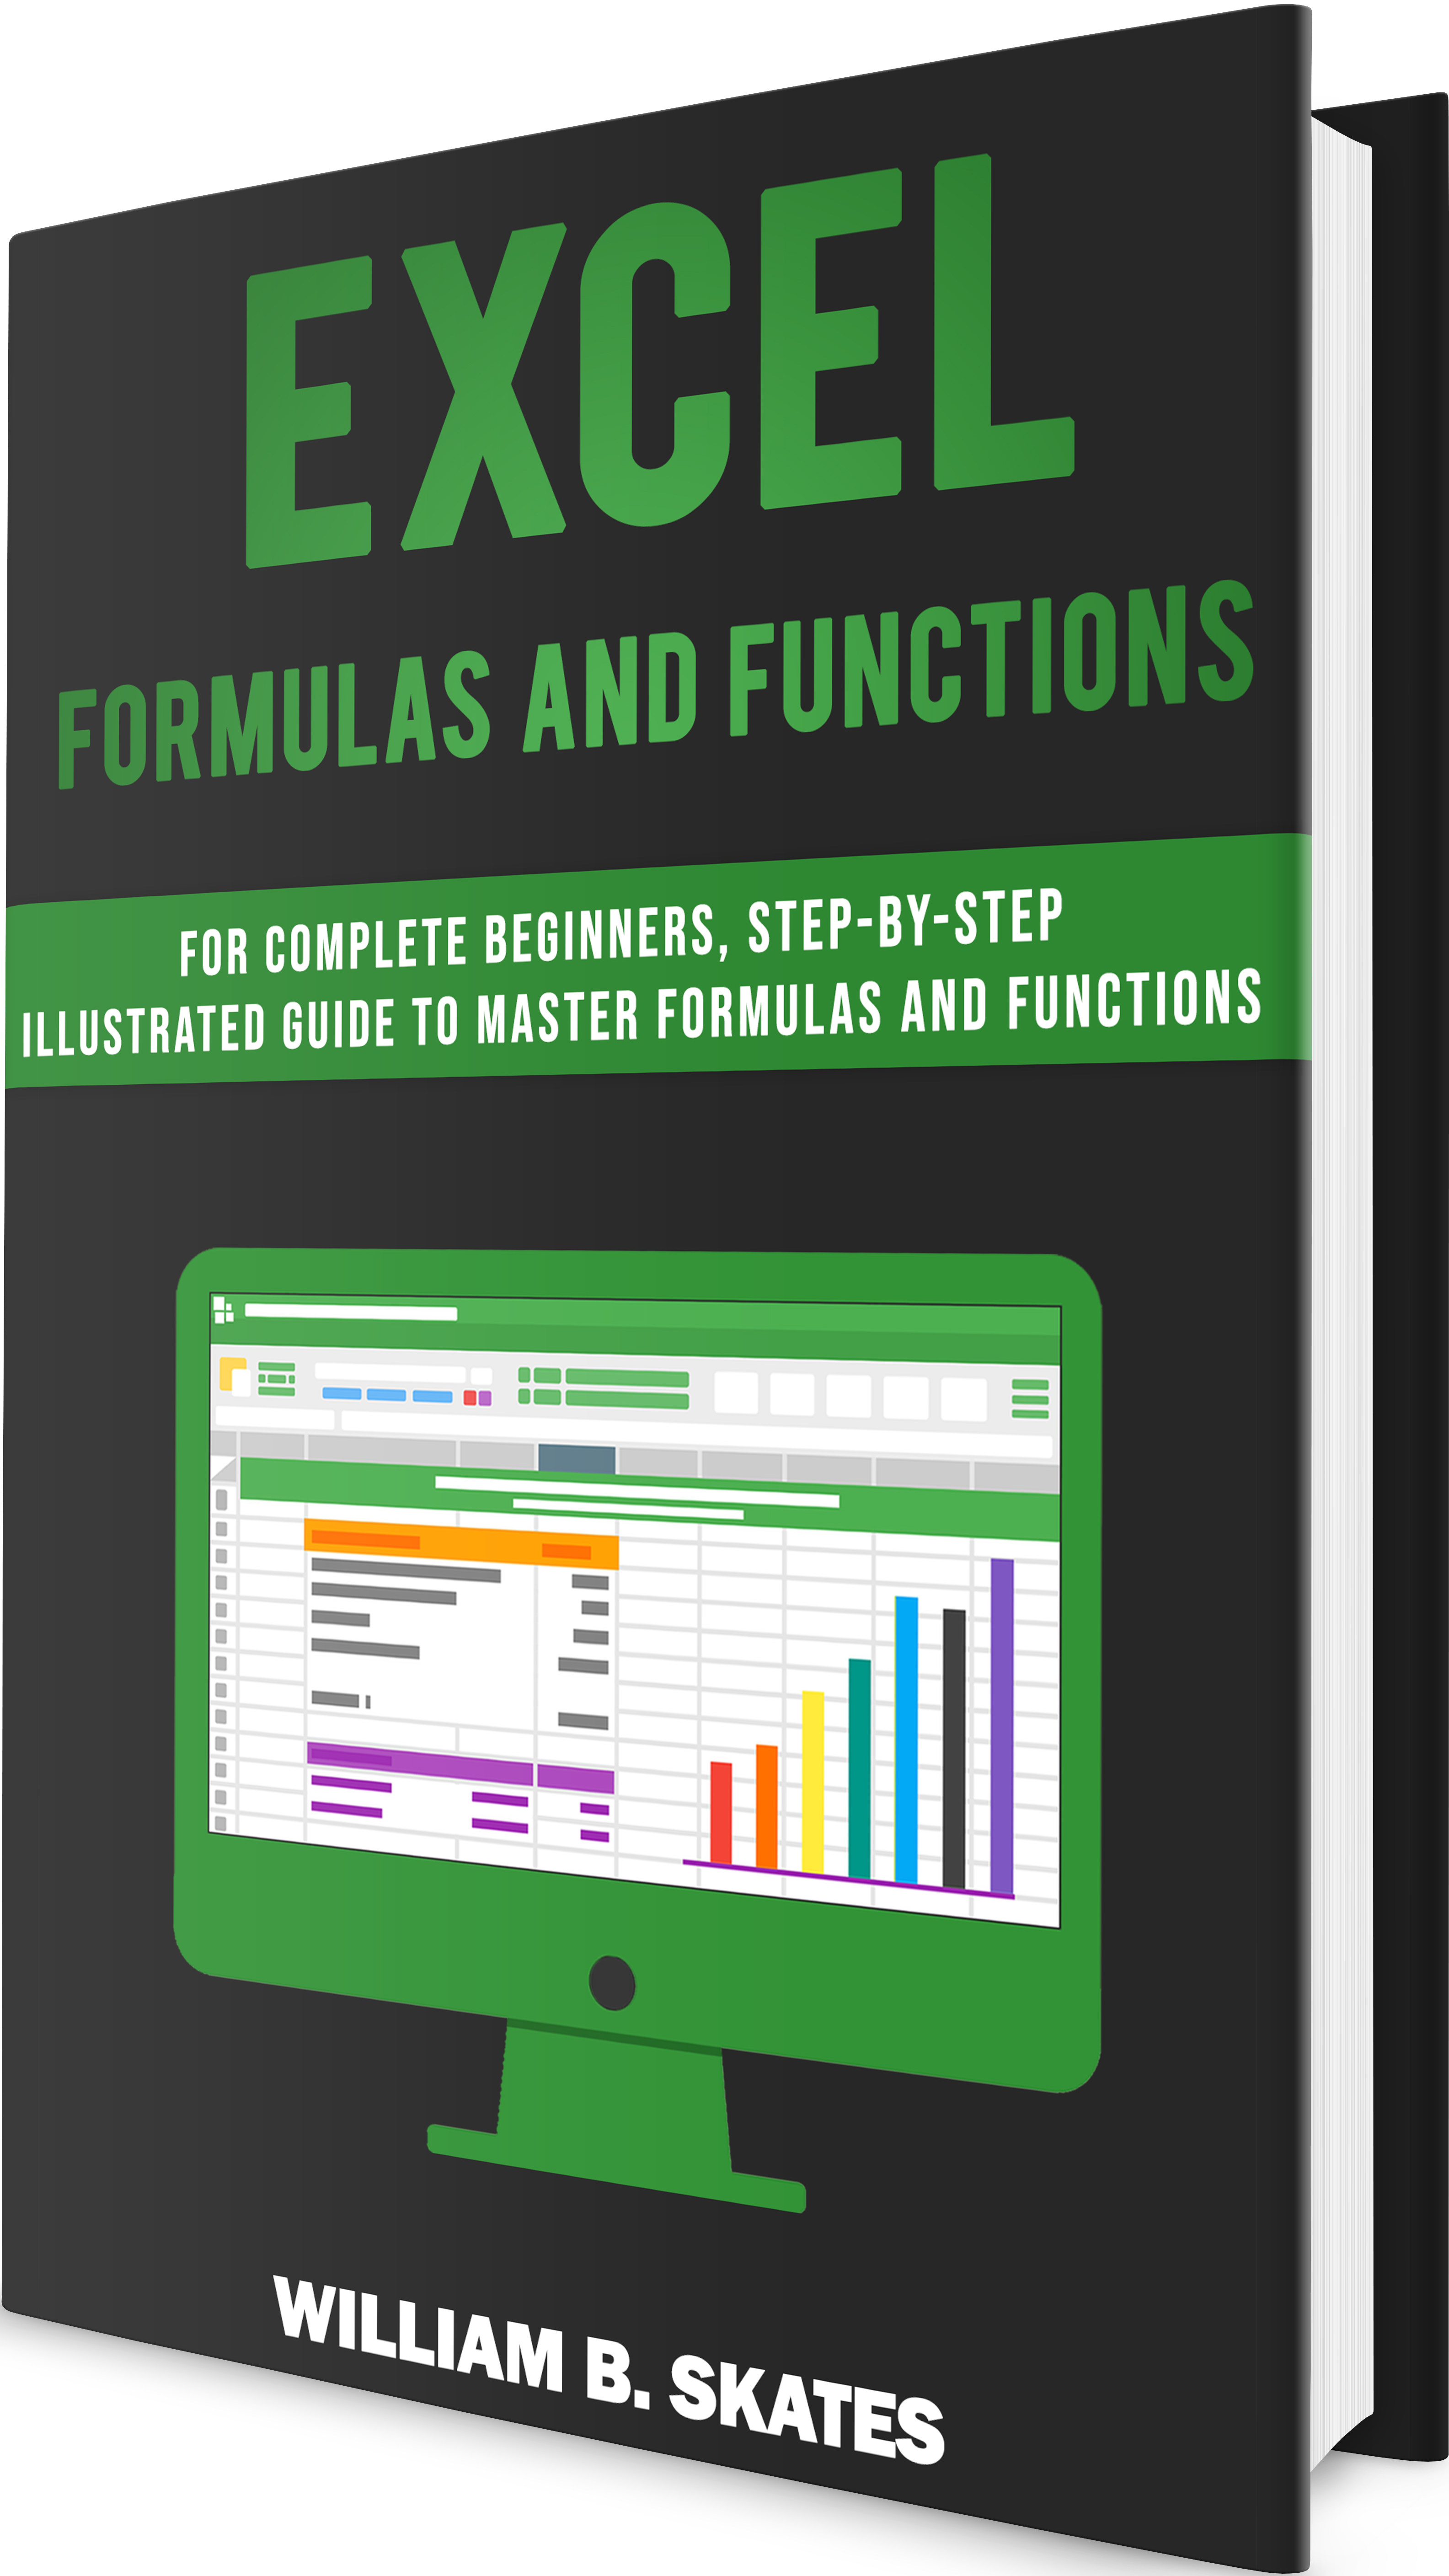 FREE: Excel Formulas and Functions: For Complete Beginners by William B. Skates